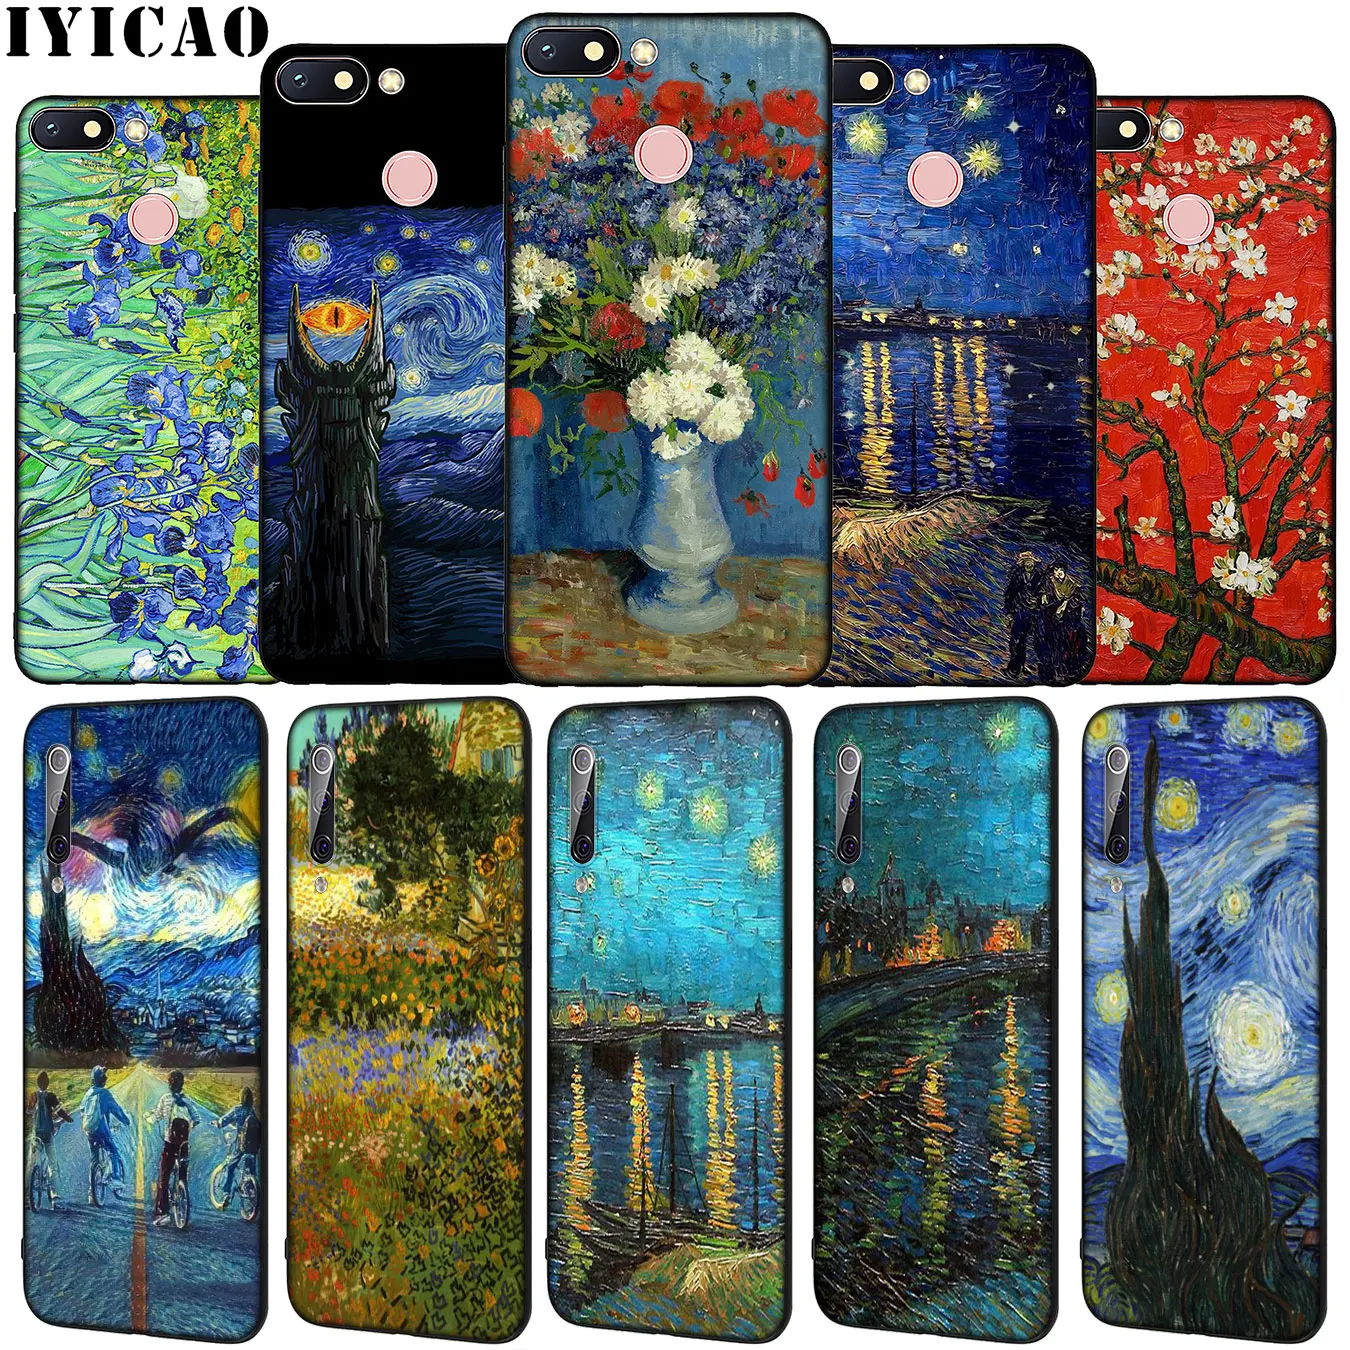 Фото IYICAO Starry Night Van Gogh Soft Silicone Phone Case for Xiaomi Redmi Note 8 8T 8A 7 7A 6 6A 5 5A GO S2 K30 K20 Pro Cover | Мобильные